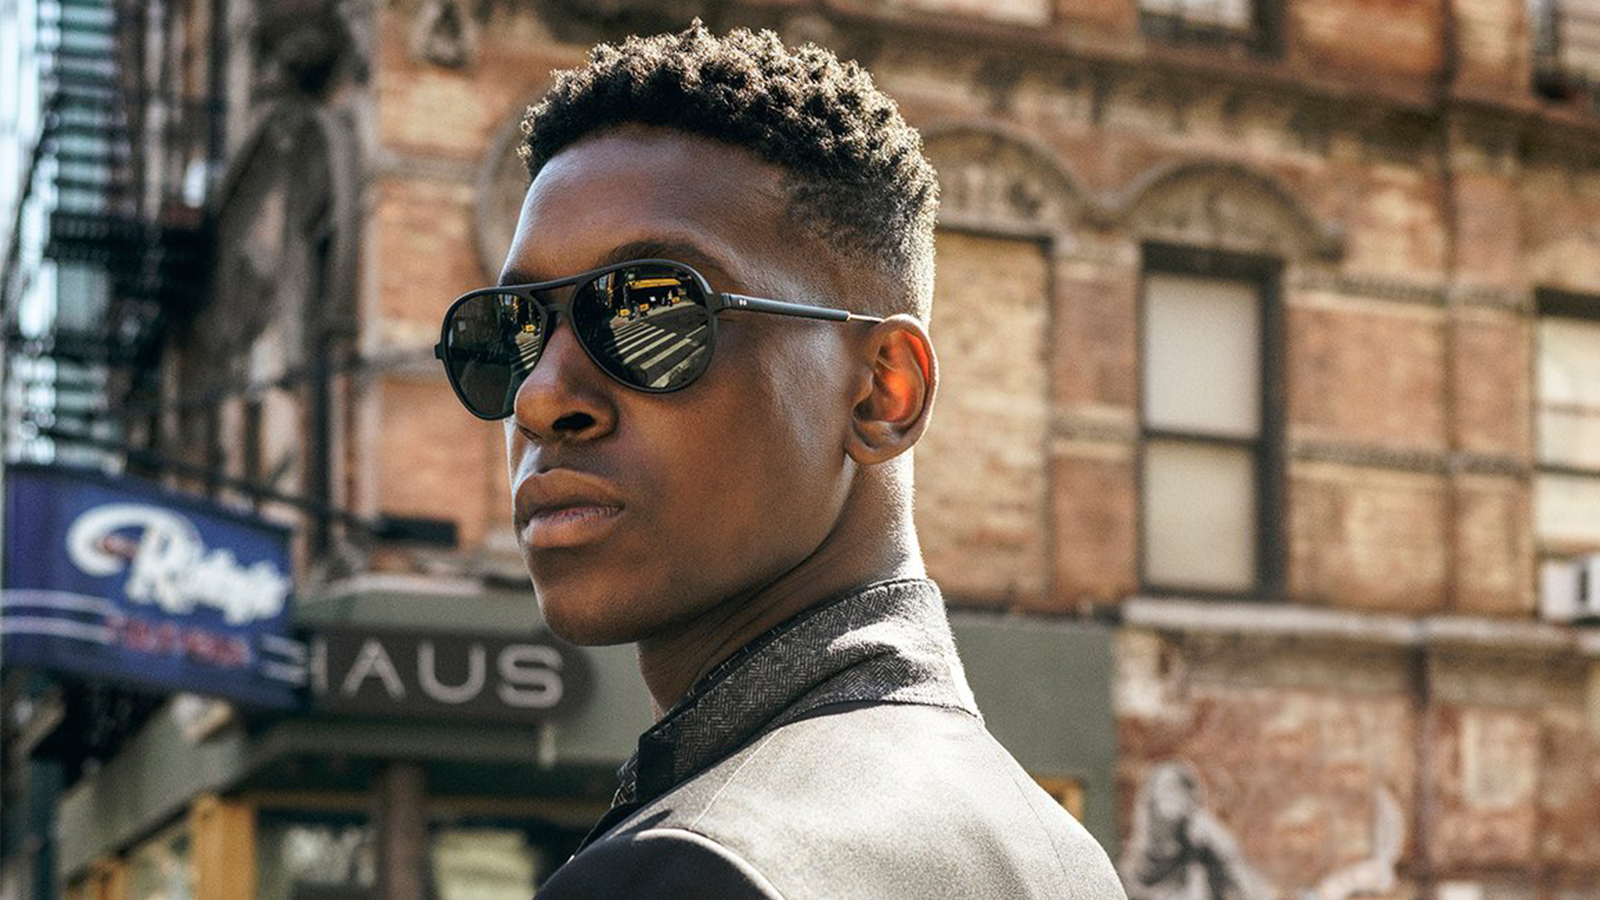 MOSCOT Spring 2020 collection